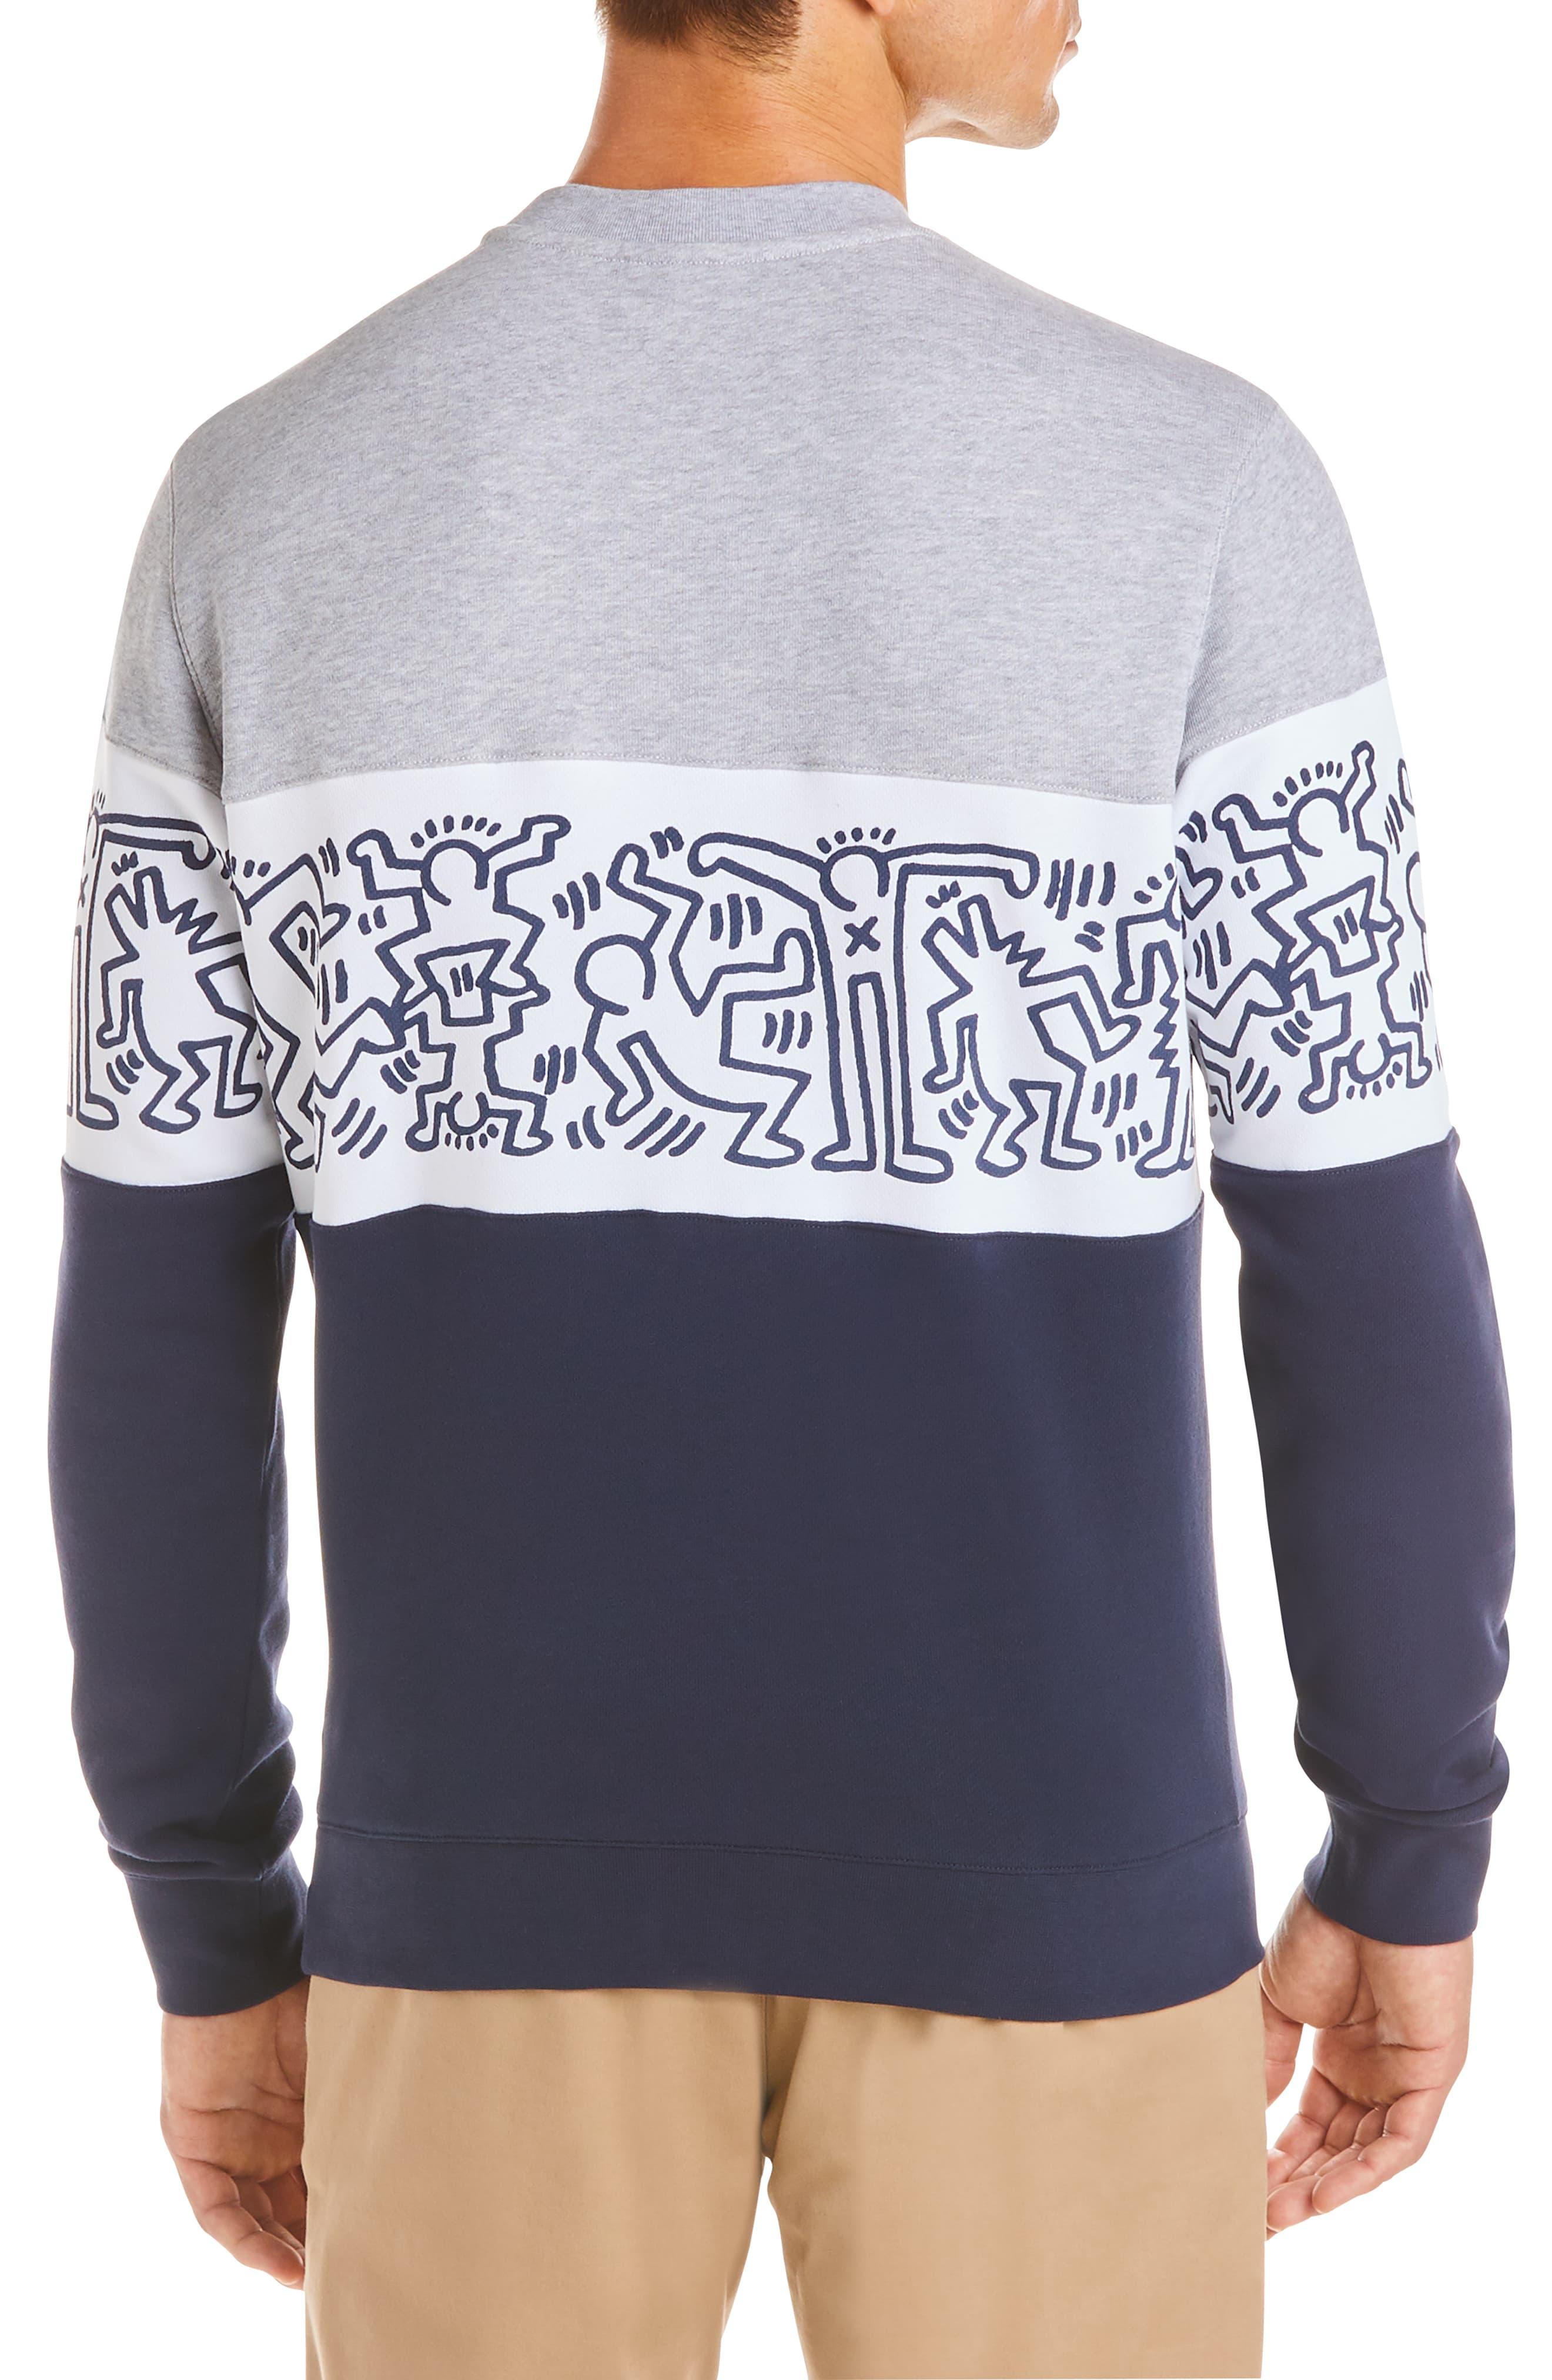 Lacoste X Keith Haring Sweater Sale, 56% OFF | www.chine-magazine.com